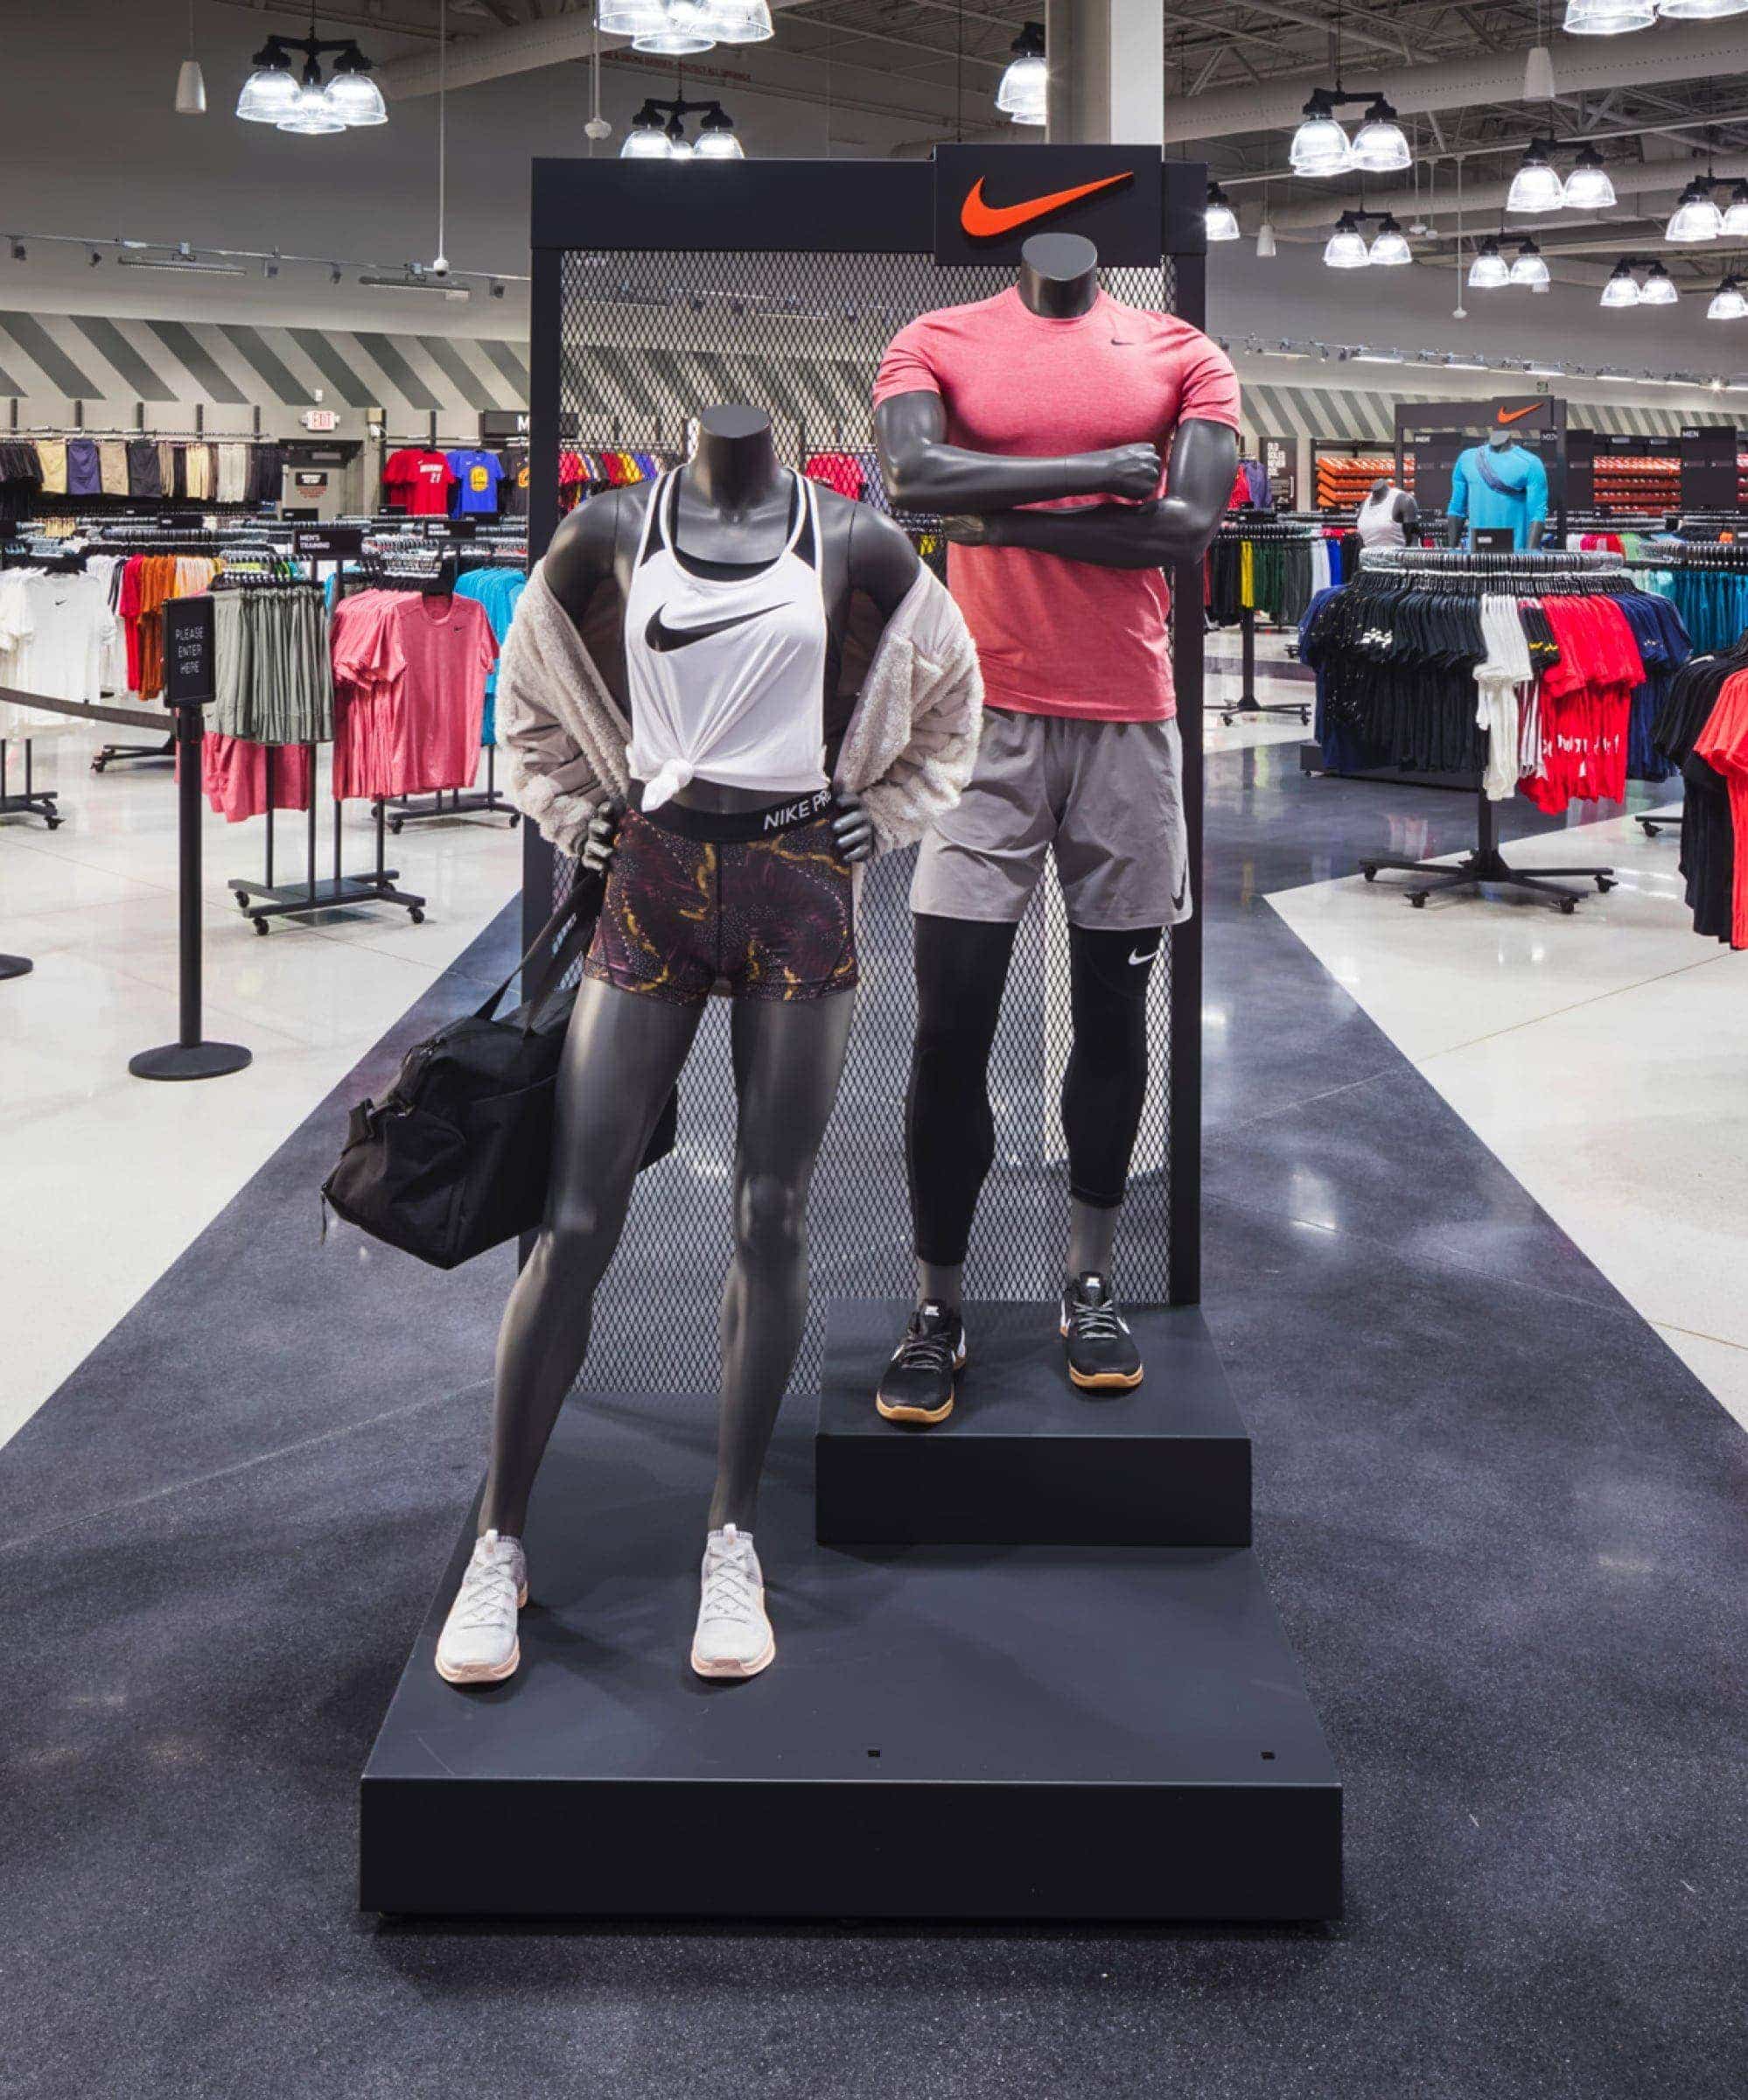 geloof Monument een andere Nike Clearance Store - Memphis. Memphis, TN. Nike.com